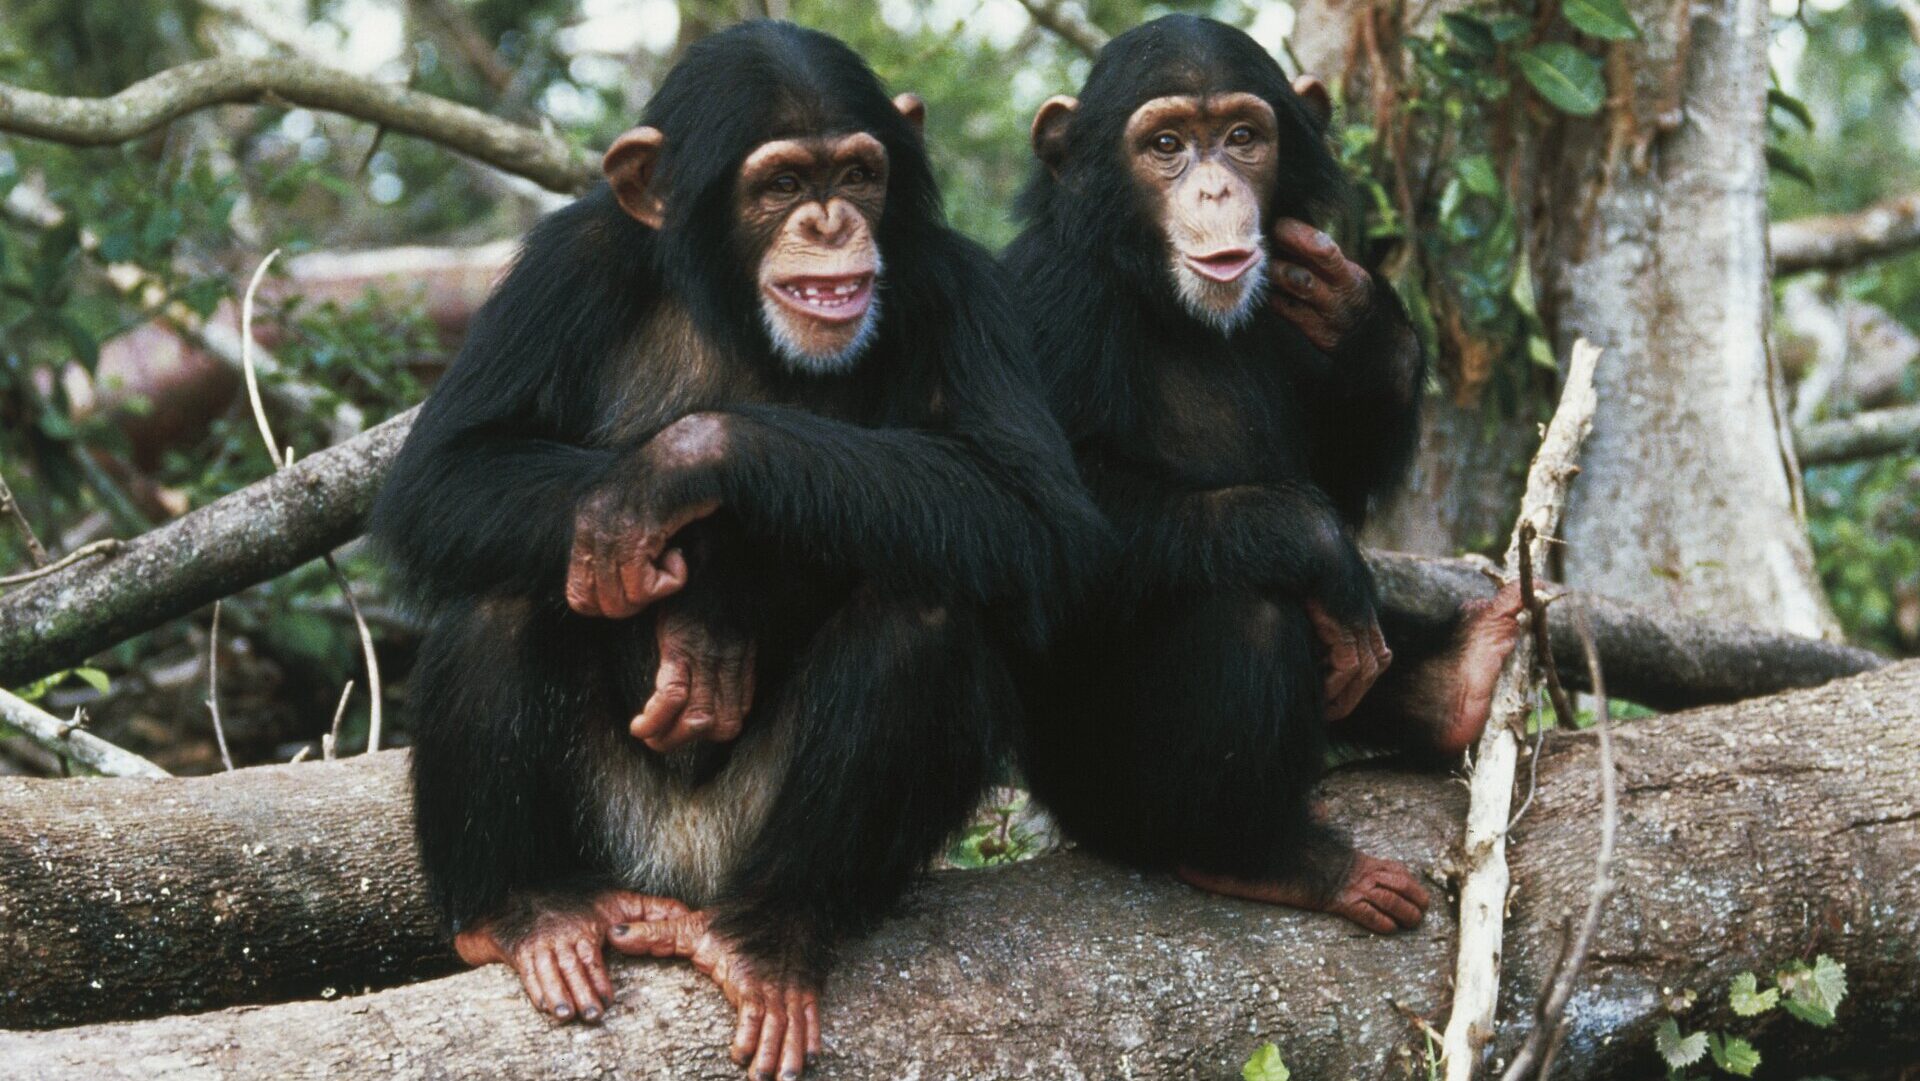 Chimpanzees Chat Up a Storm With Human-Like Gestures, Study Finds